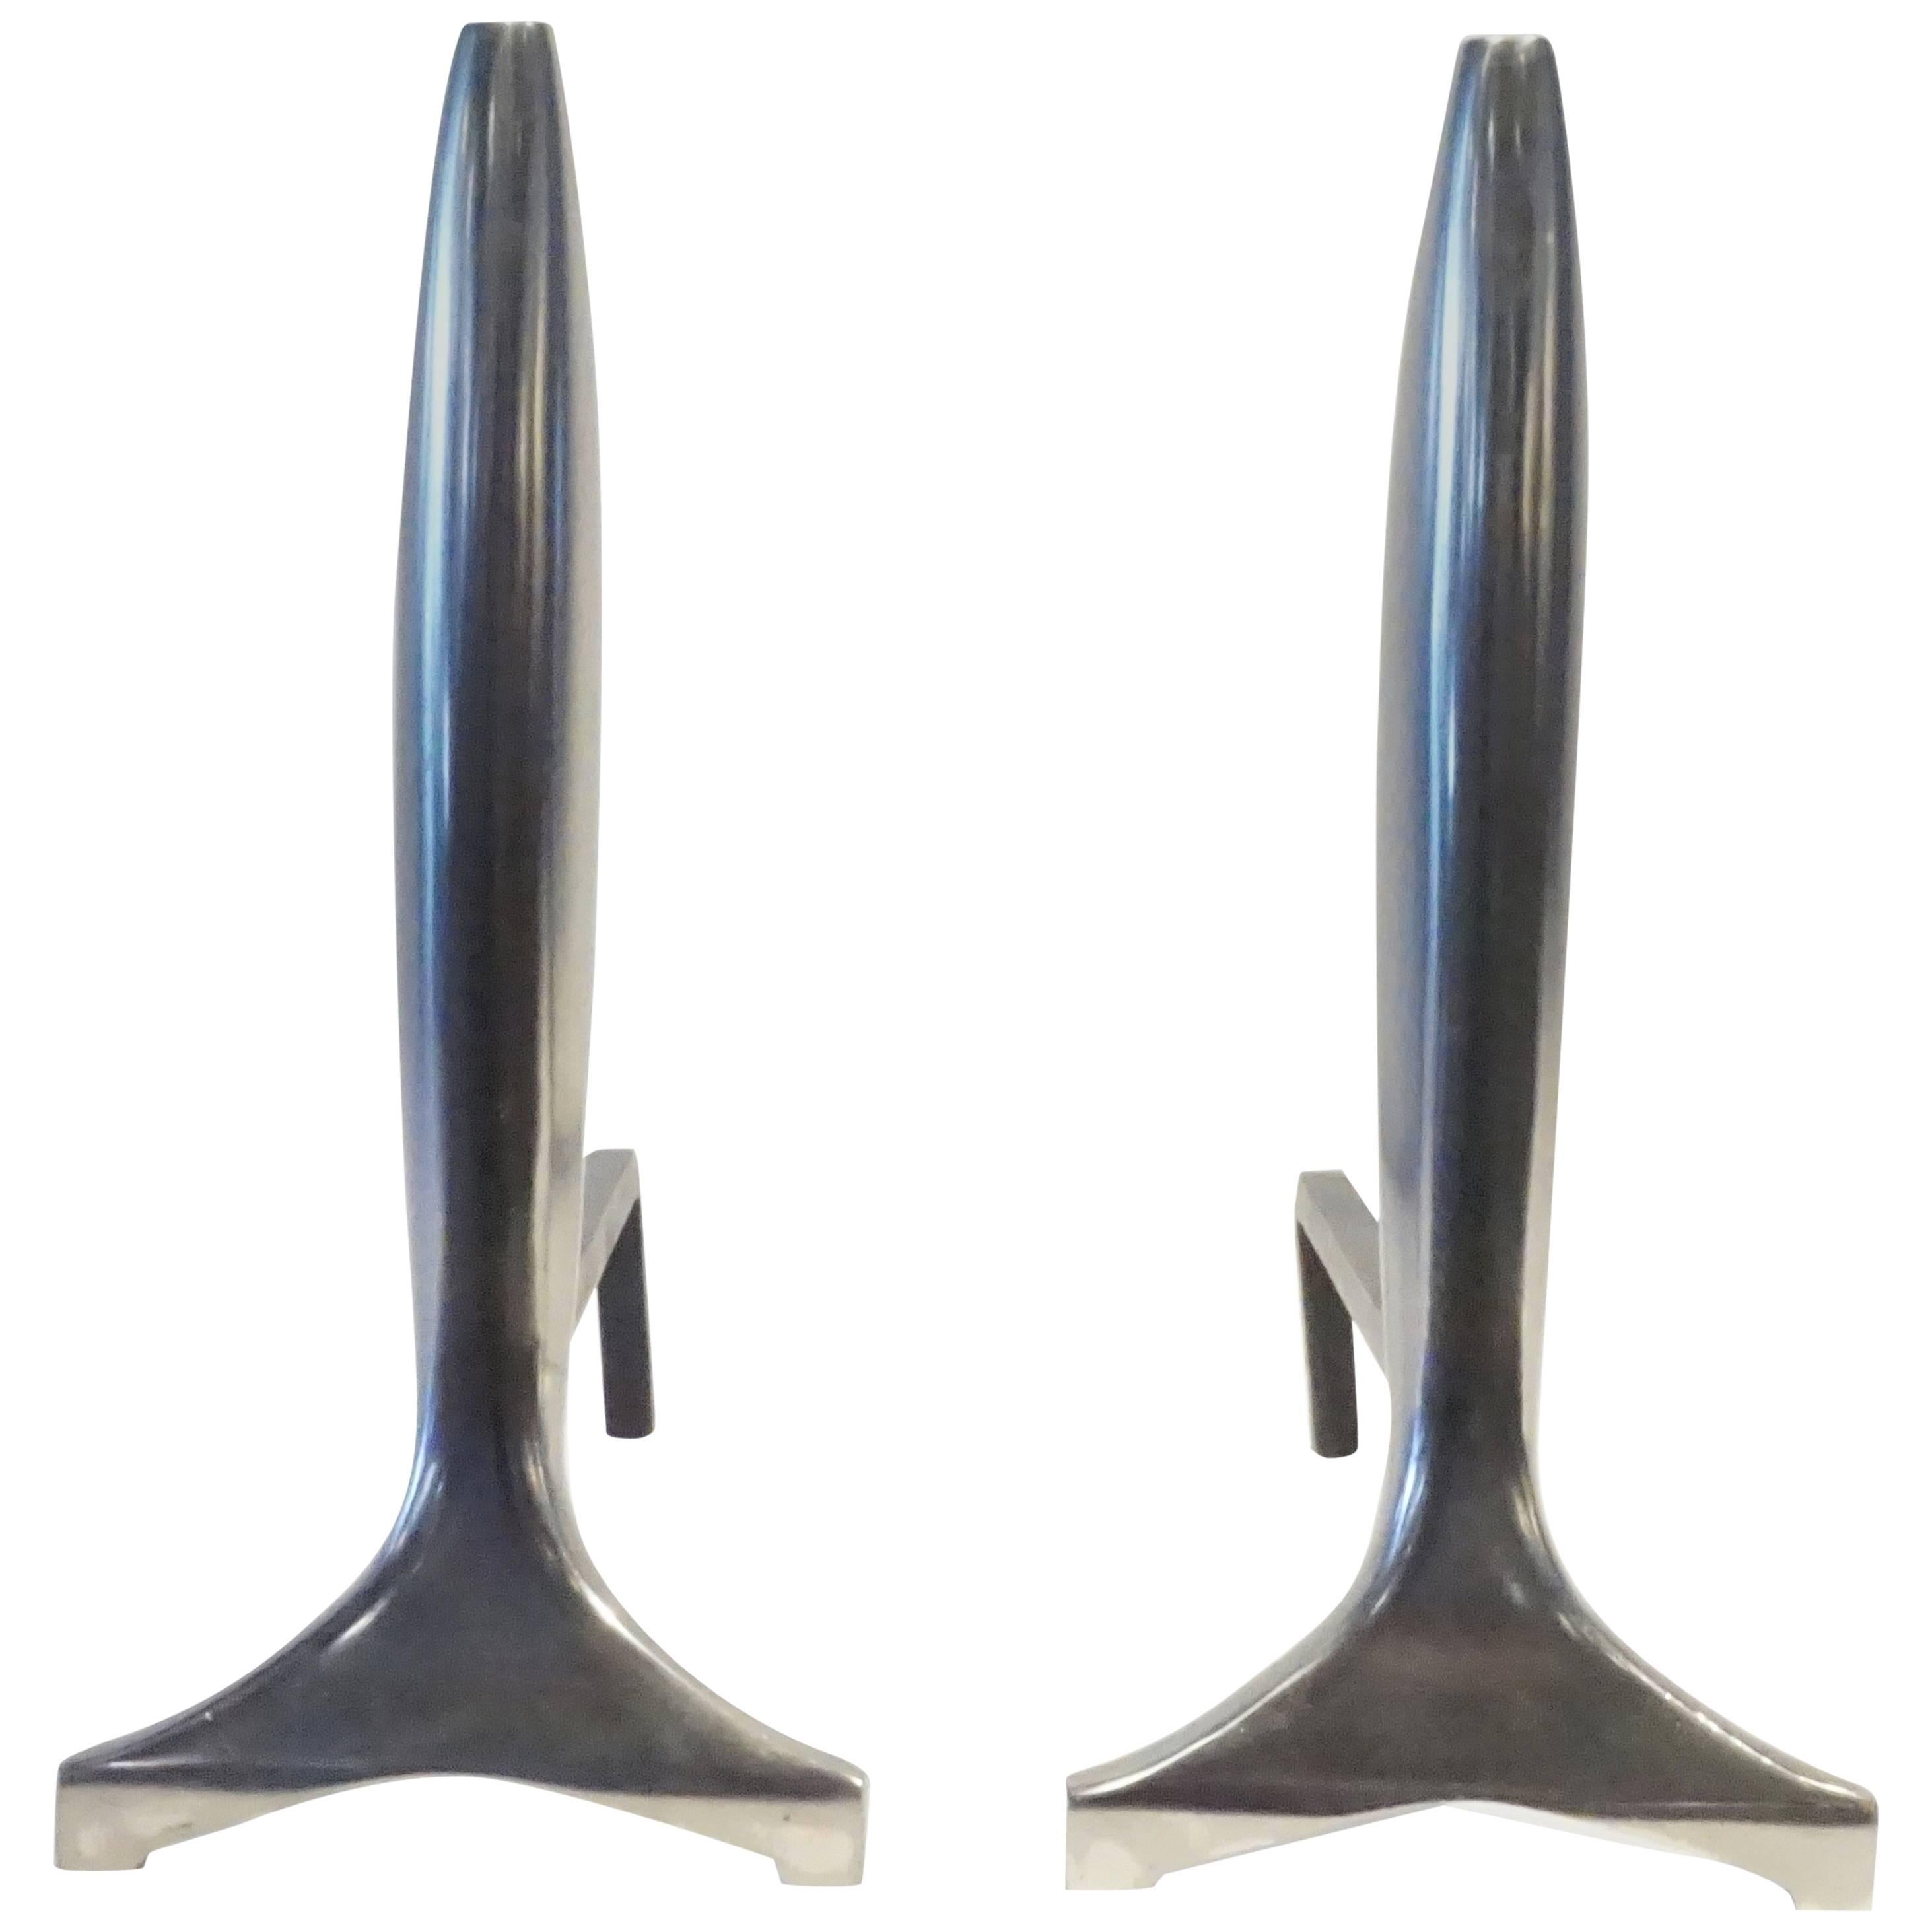 Pair of American Modernist Polished Aluminum Andirons C. 1940s For Sale